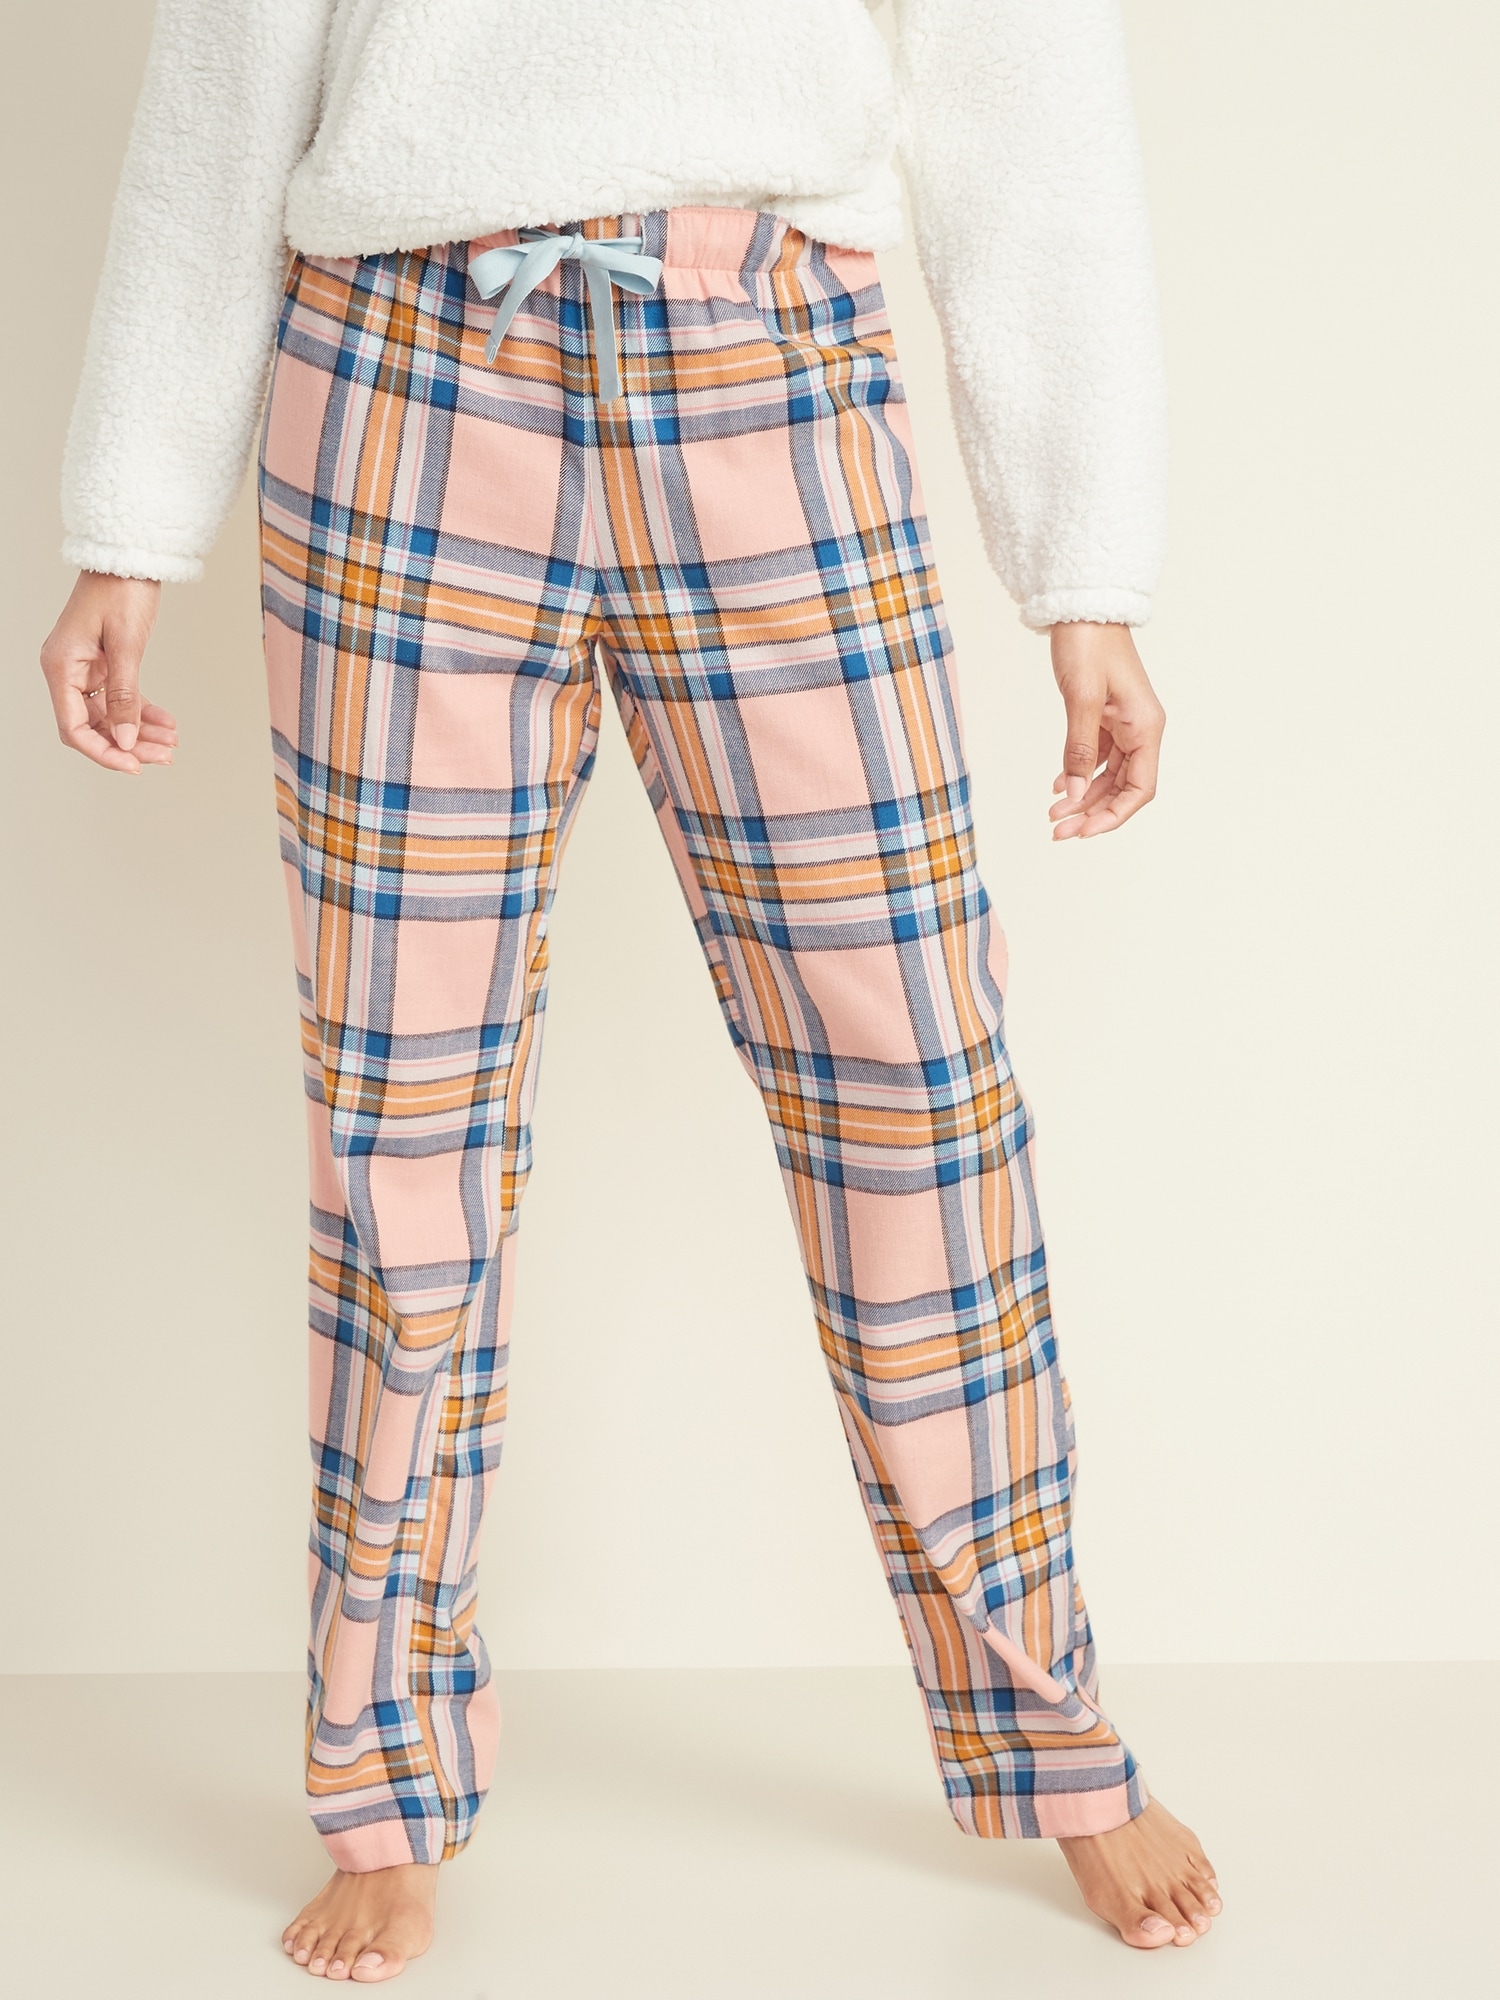 Patterned Flannel Pajama Pants for Women, Old Navy